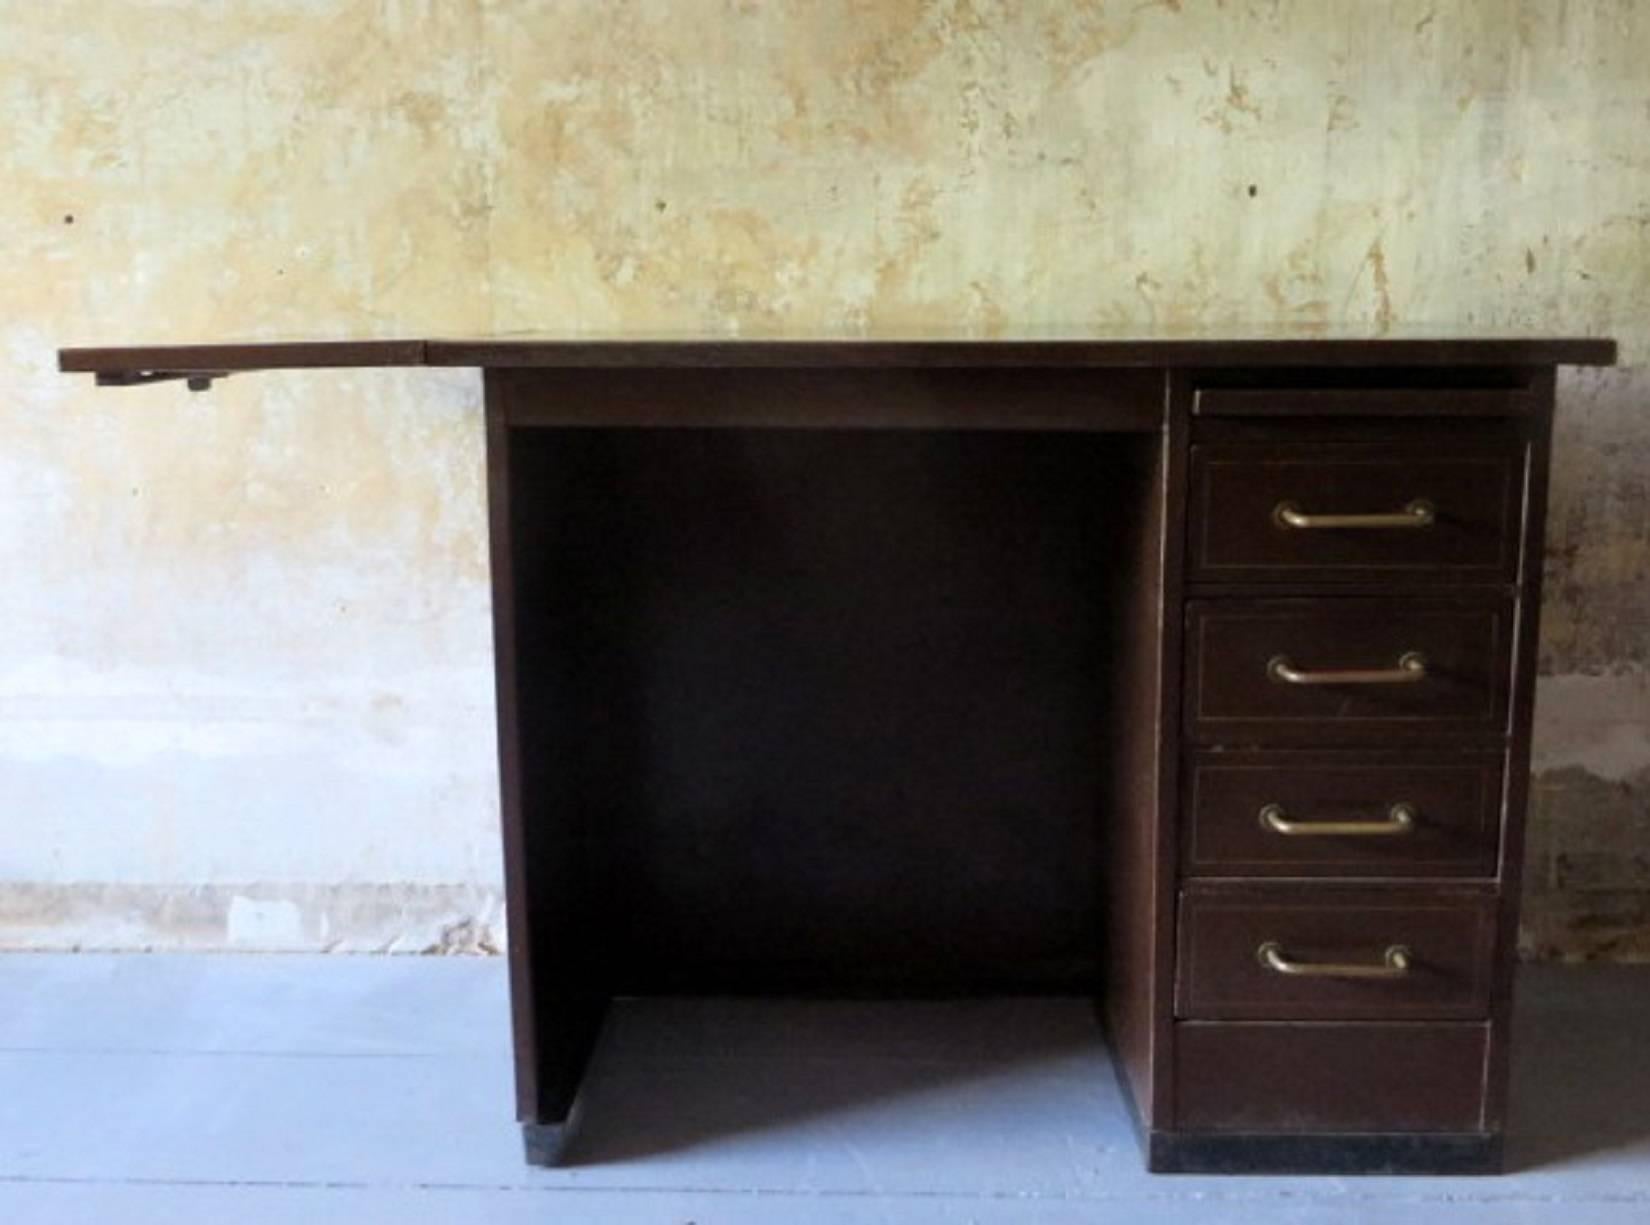 Very pretty French industrial metal desk from about 1940-60 with painted gold-colored inlay on the top and around the drawers.
Brass handles.
The desk has a flap to extend the width.
Nicely patinated.
Small size. The desk is 92cm wide with the